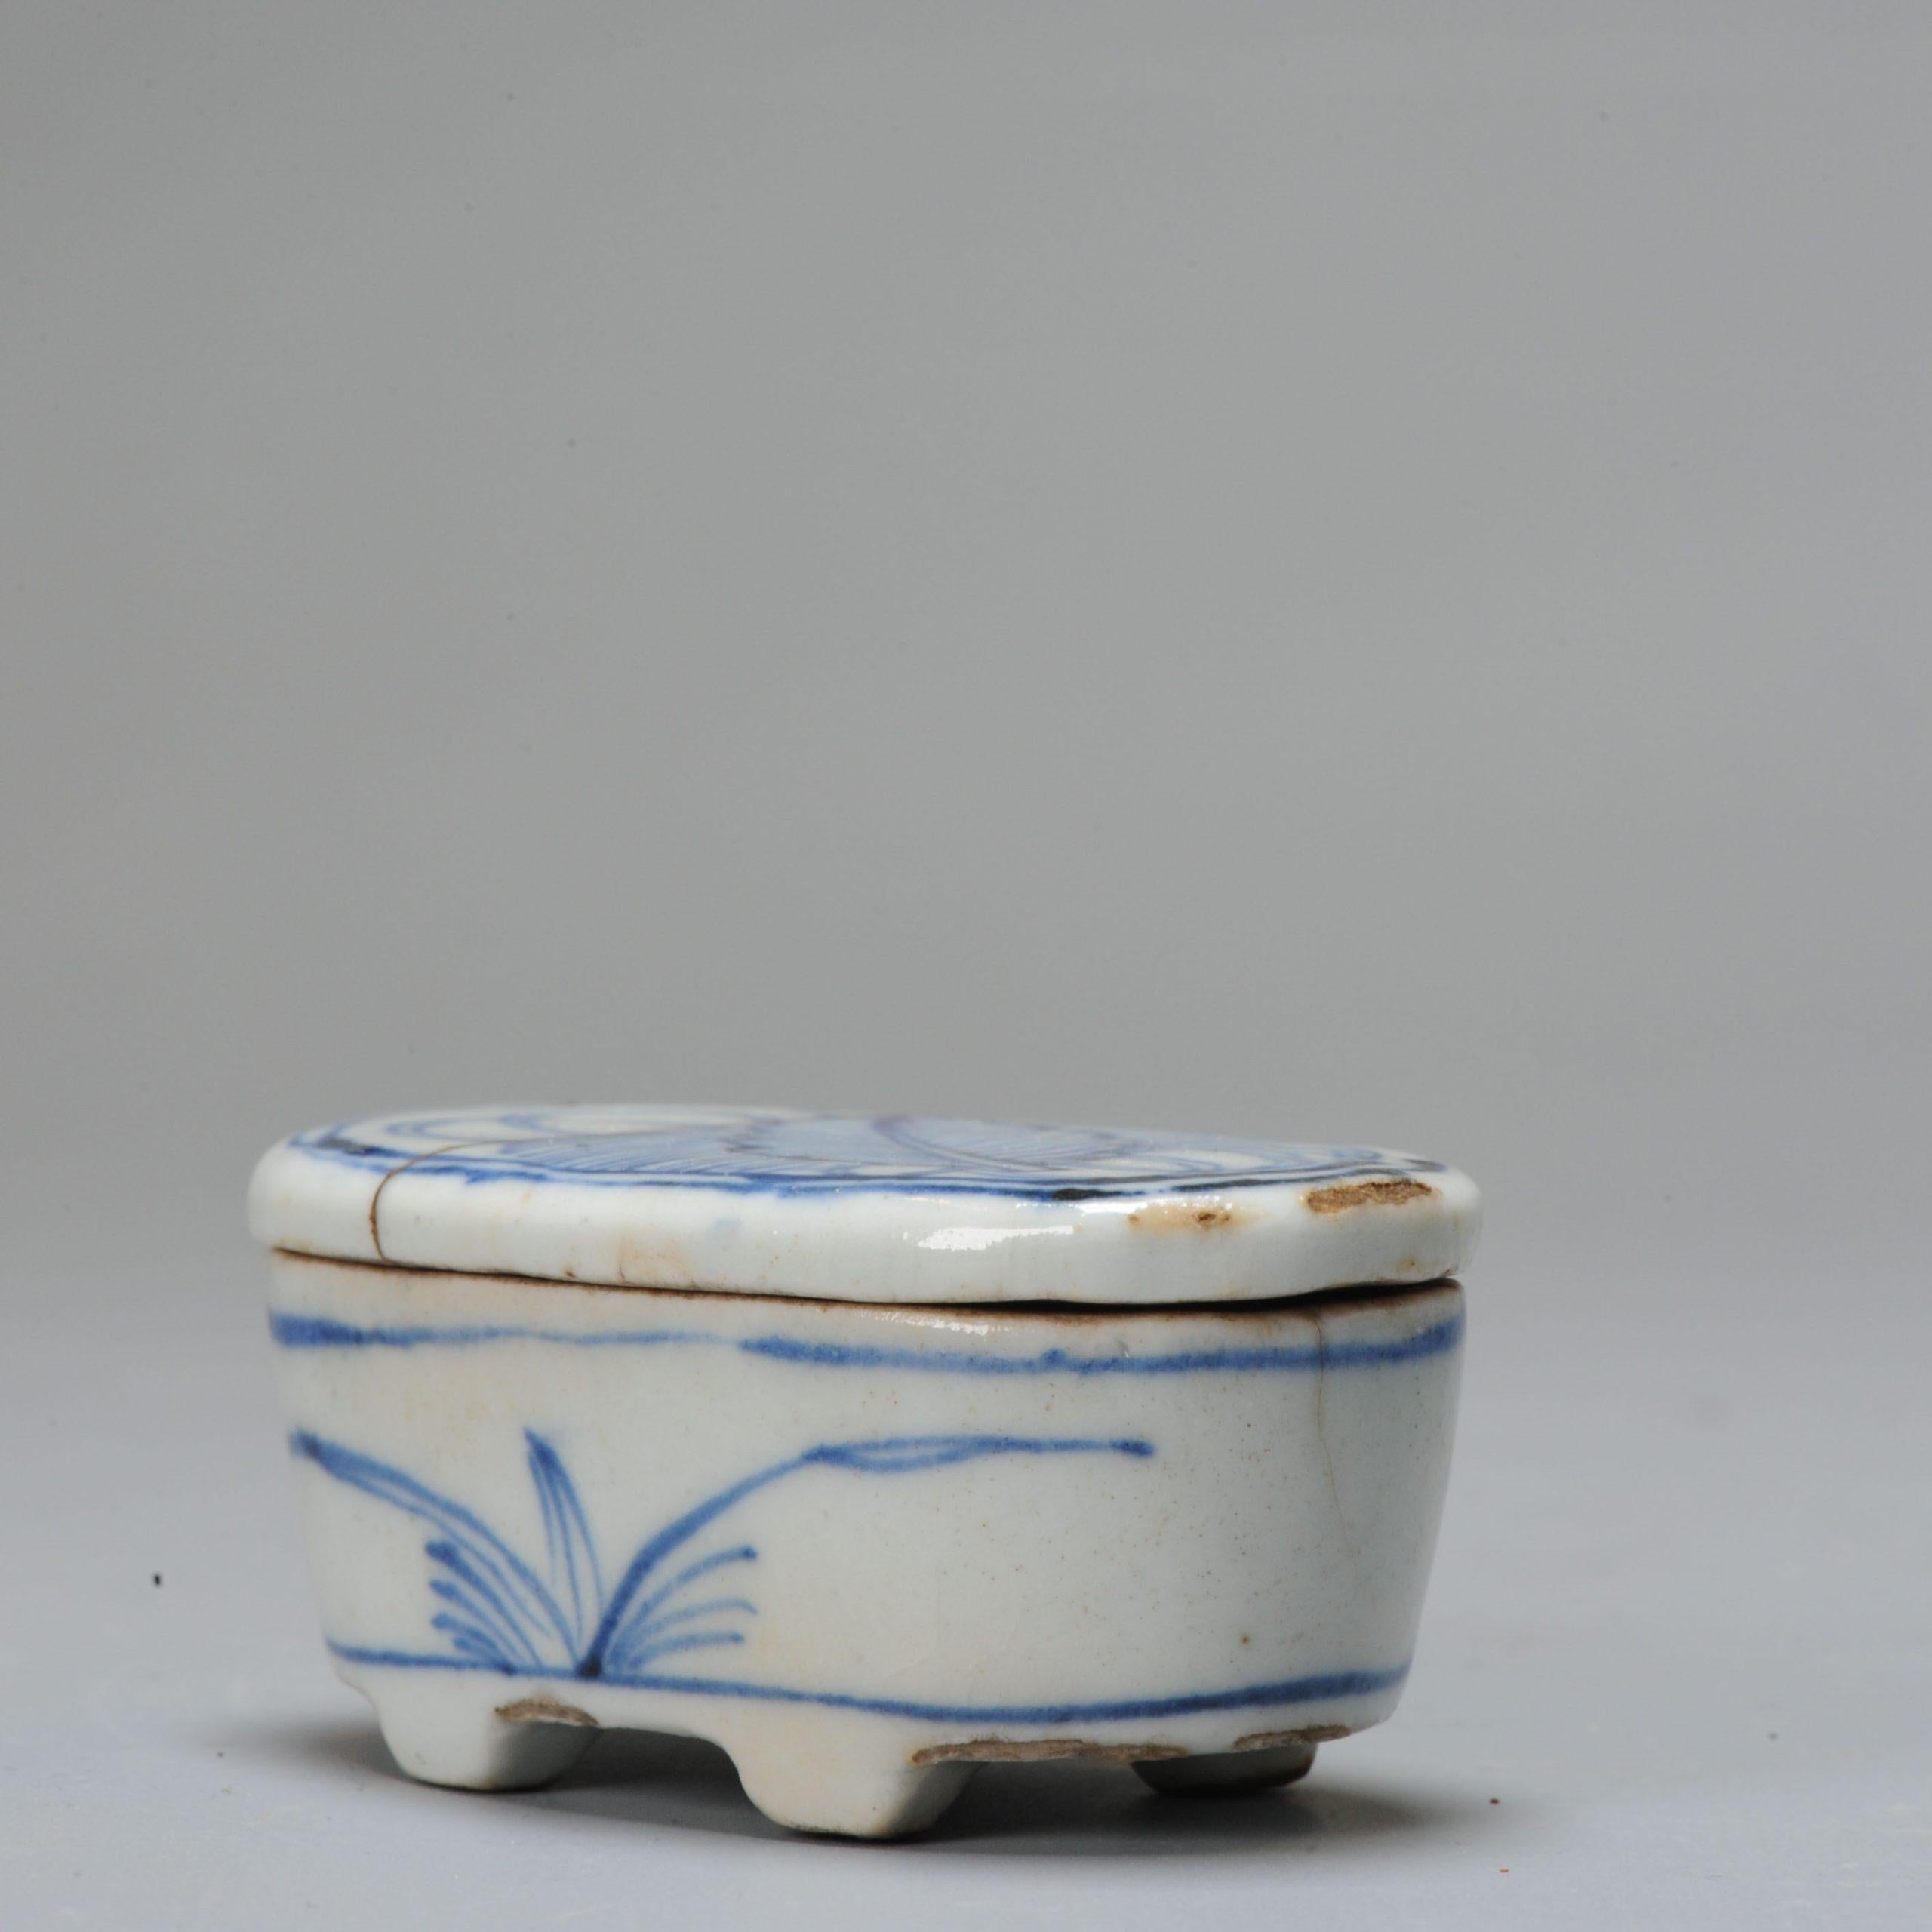 17th century chinese porcelain, transitional period, made for the Japanese market. This unusual Kosumetsuke Kogo would have held incense that is added to the charcoal fire during the charcoal laying procedure.⁠ This lidded box is 6.5cm in length and